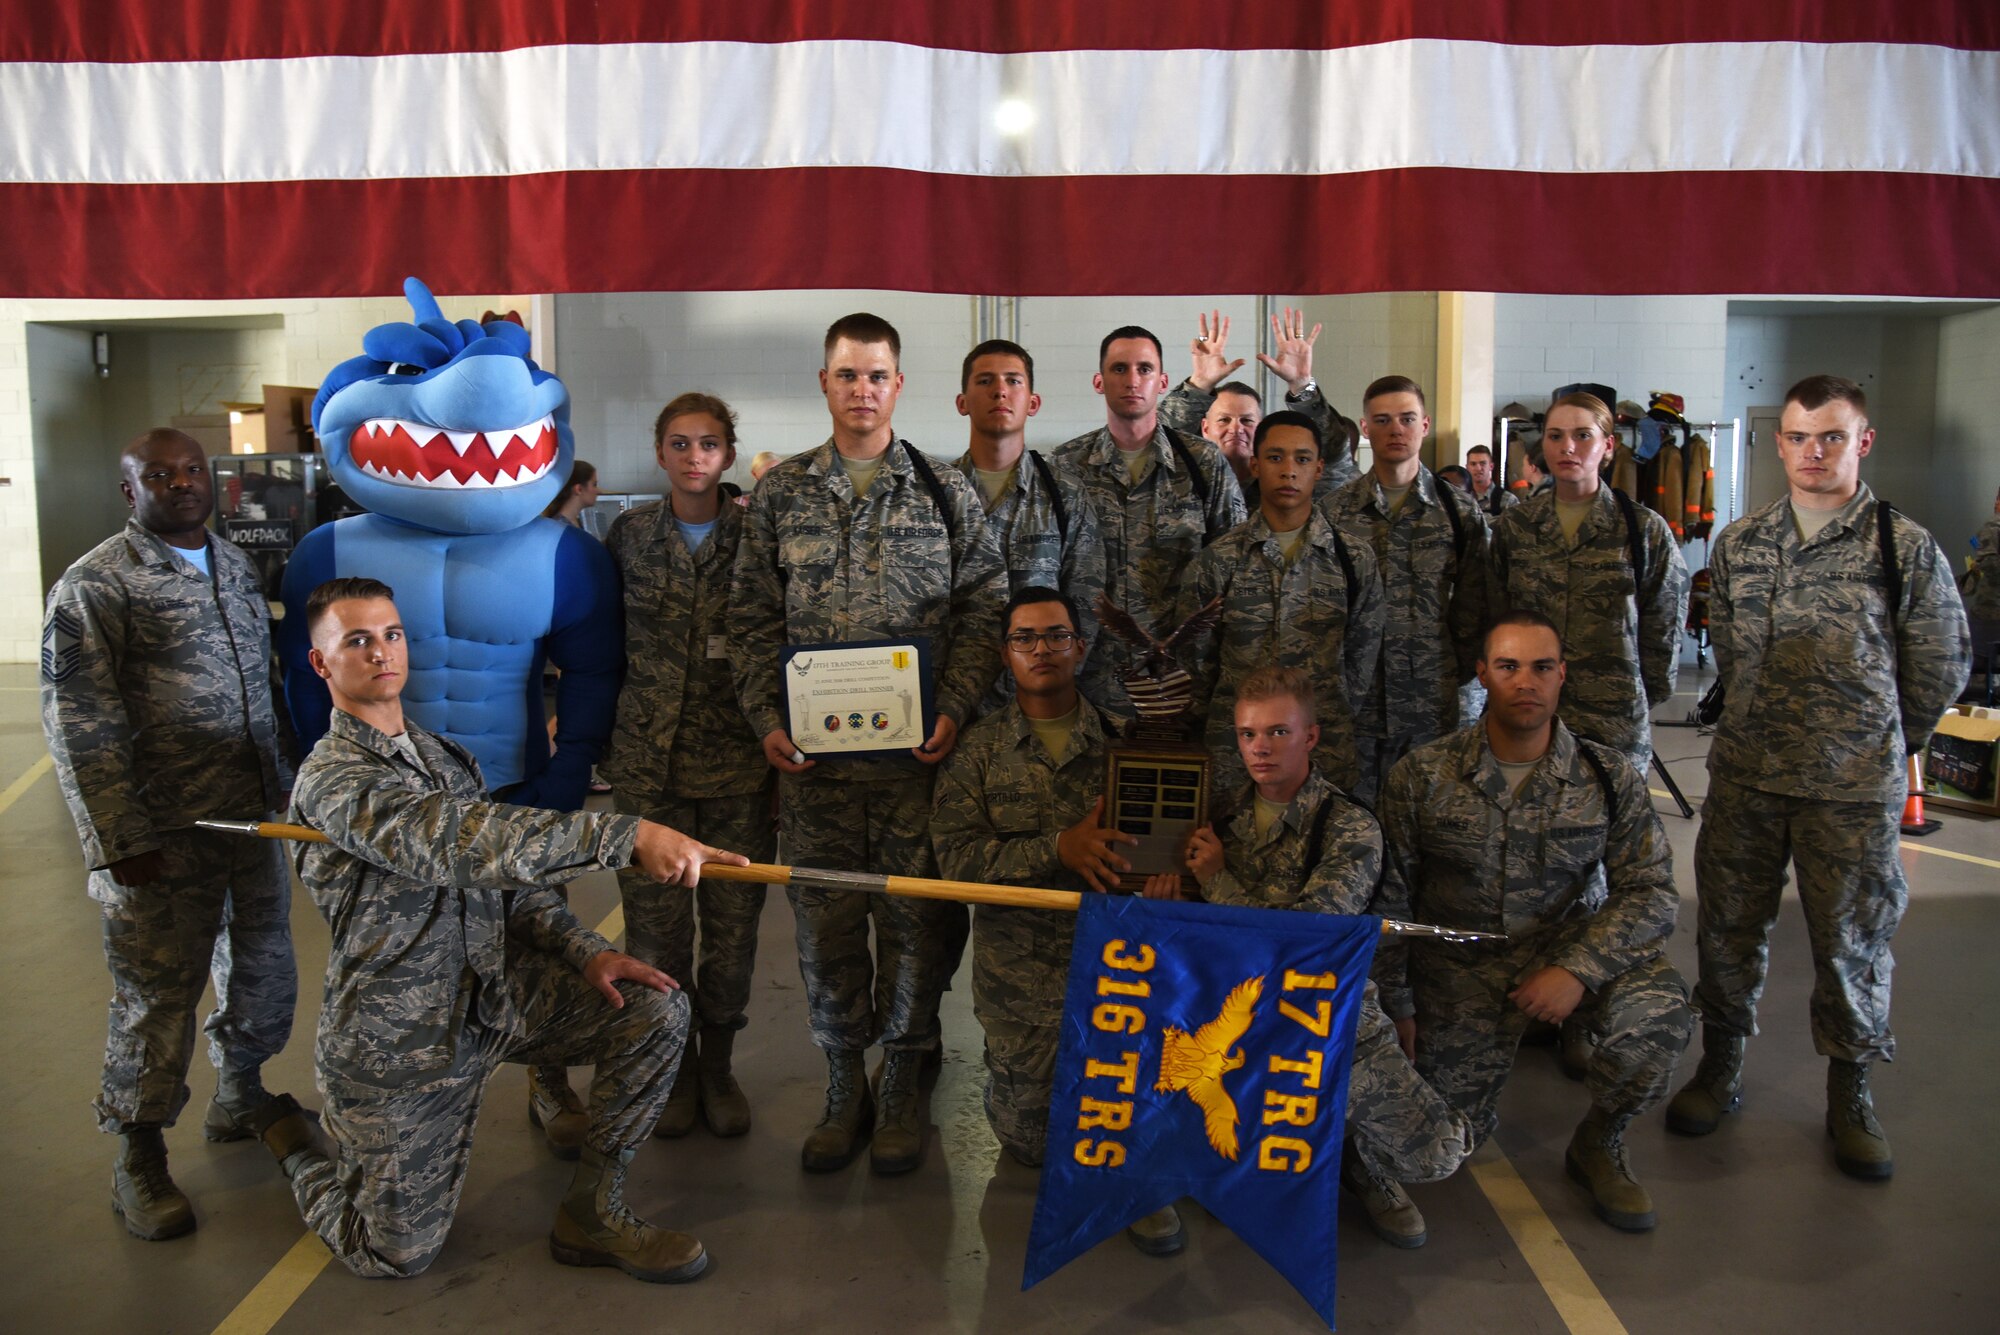 The 316th Training Squadron drill team poses with the first place overall award of the 17th Training Group drill competition at the Louis F. Garland Department of Defense Fire Academy on Goodfellow Air Force Base, Texas, June 22, 2018. To win the overall drill award the team had to score the most points in regulation and exhibition drill forms. (U.S. Air Force photo by Staff Sgt. Joshua Edwards/Released)